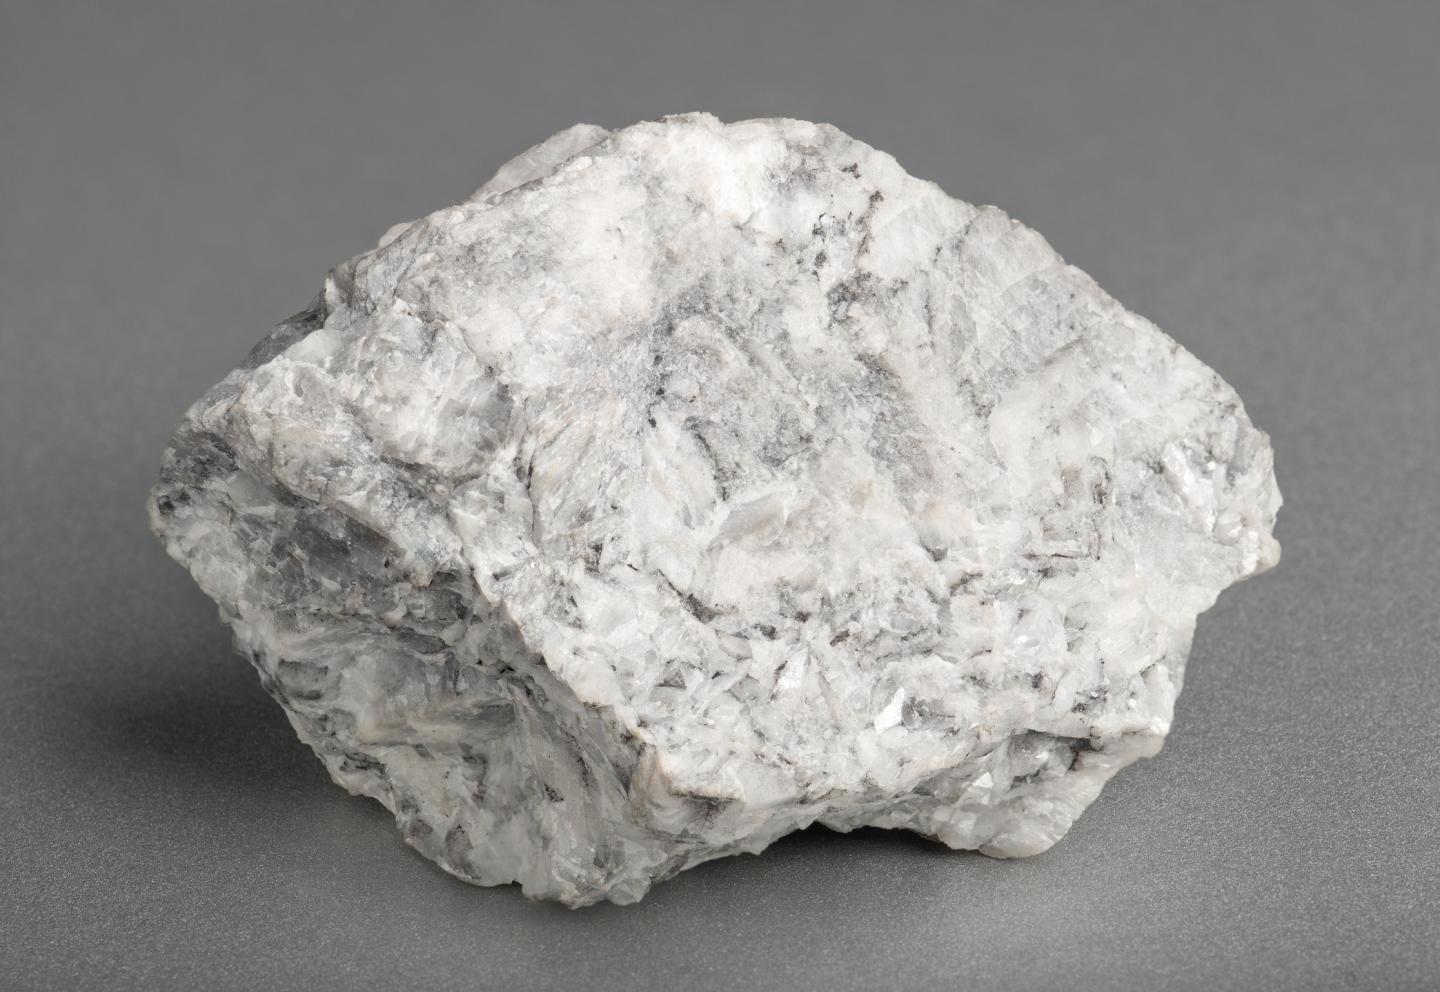 The mineral magnesite